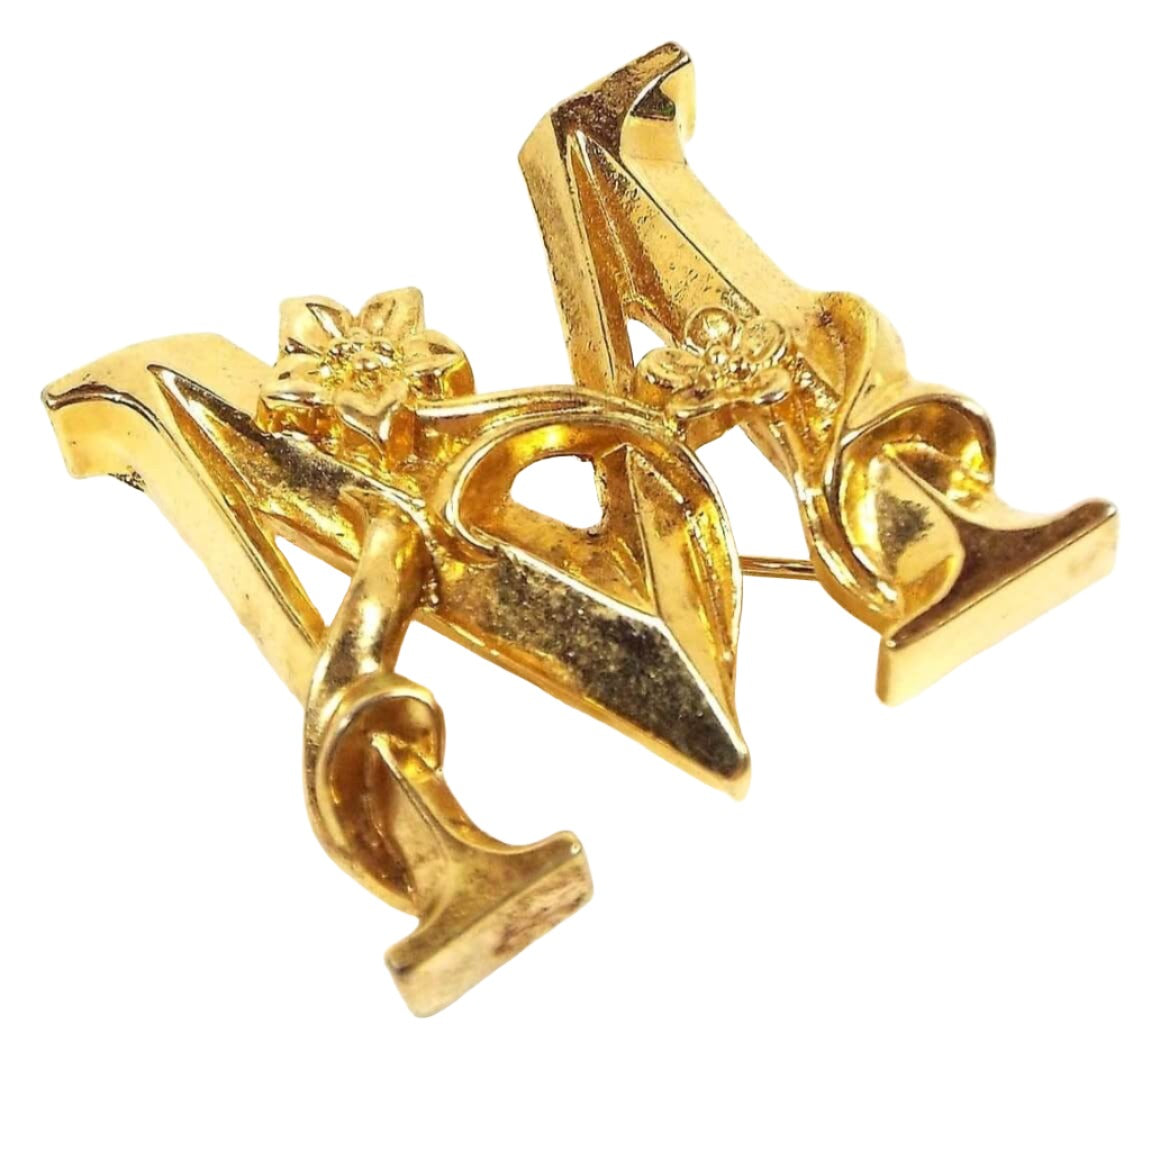 Front view of the retro vintage Avon initial brooch pin. It is gold tone in color and is shaped like a block letter M. There are two flowers wrapped around the front of the M.